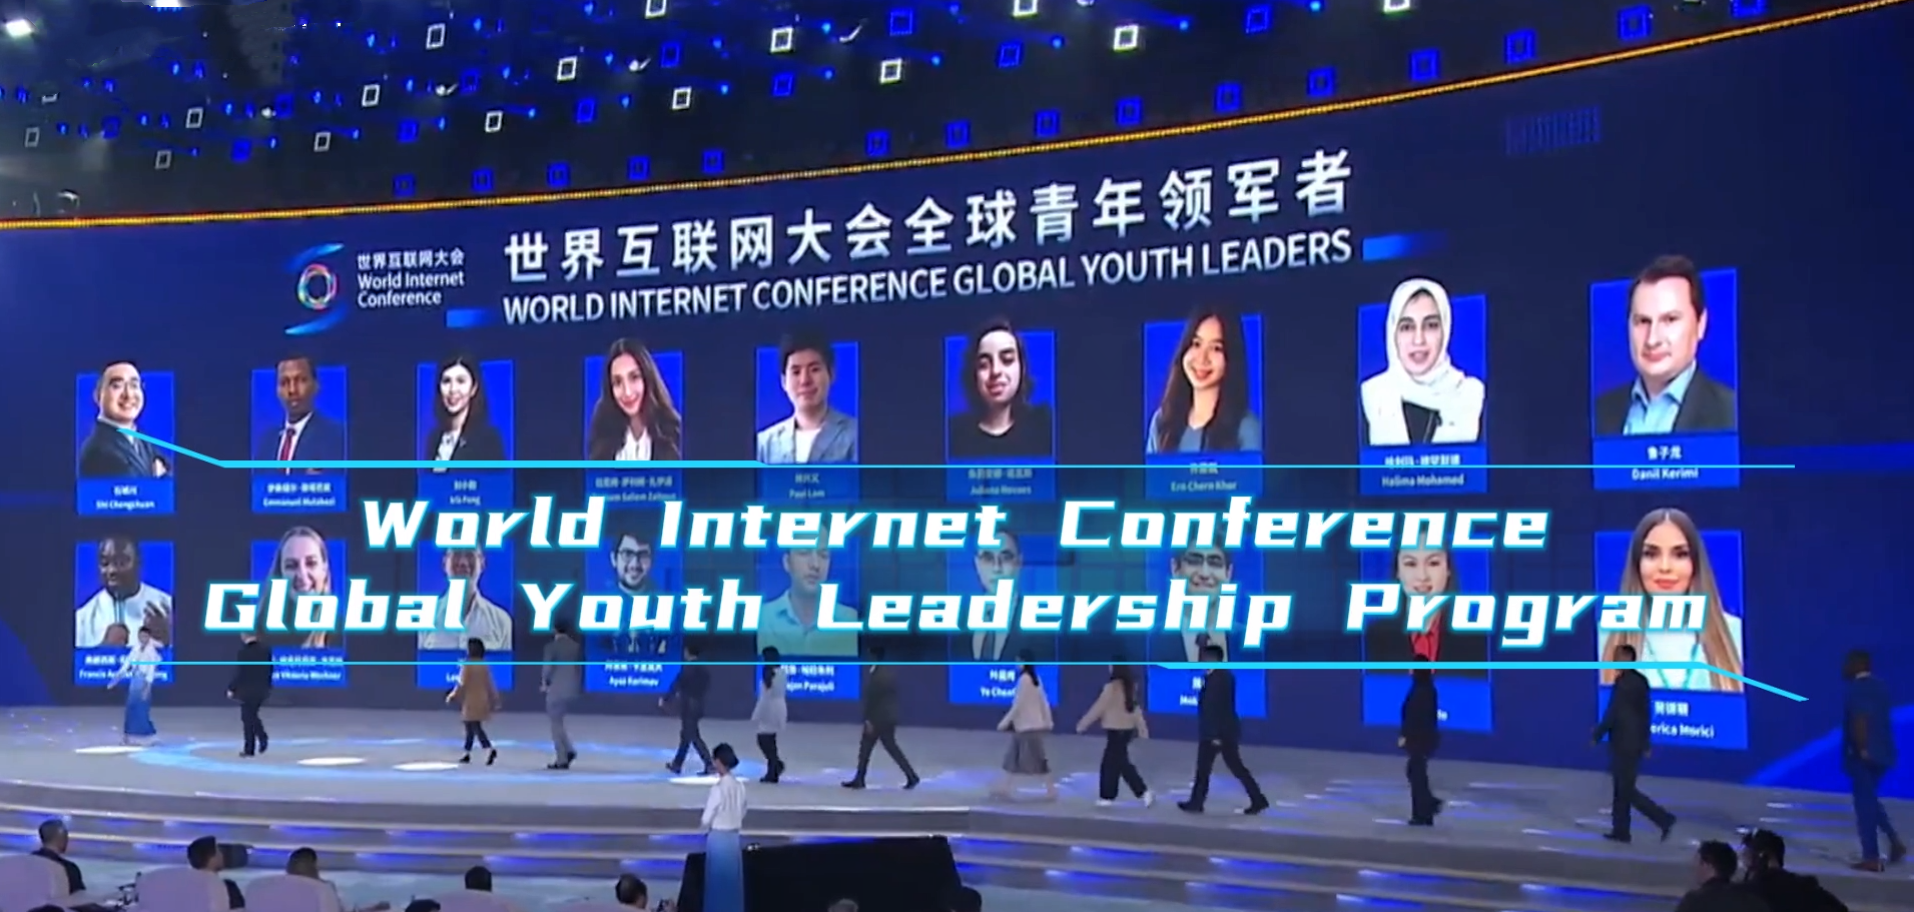 Video | Join the Global Youth Leadership Program and shape the future of cyberspace